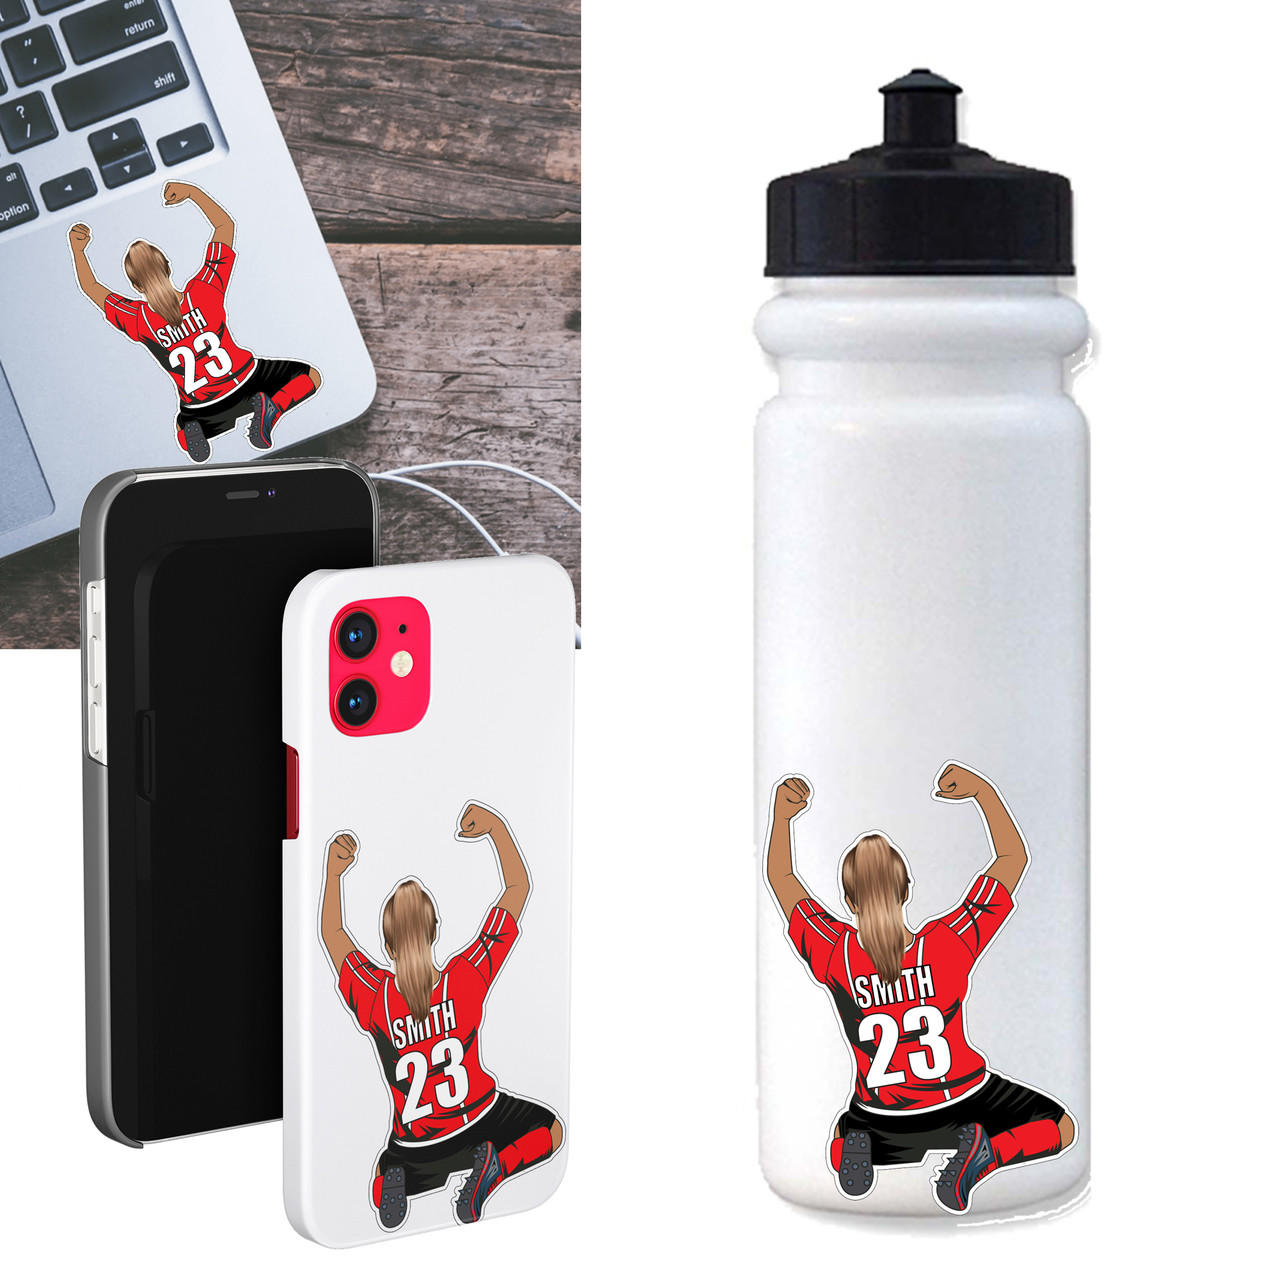 Personalized Soccer Water Bottle Sticker-3 Pack Questions & Answers